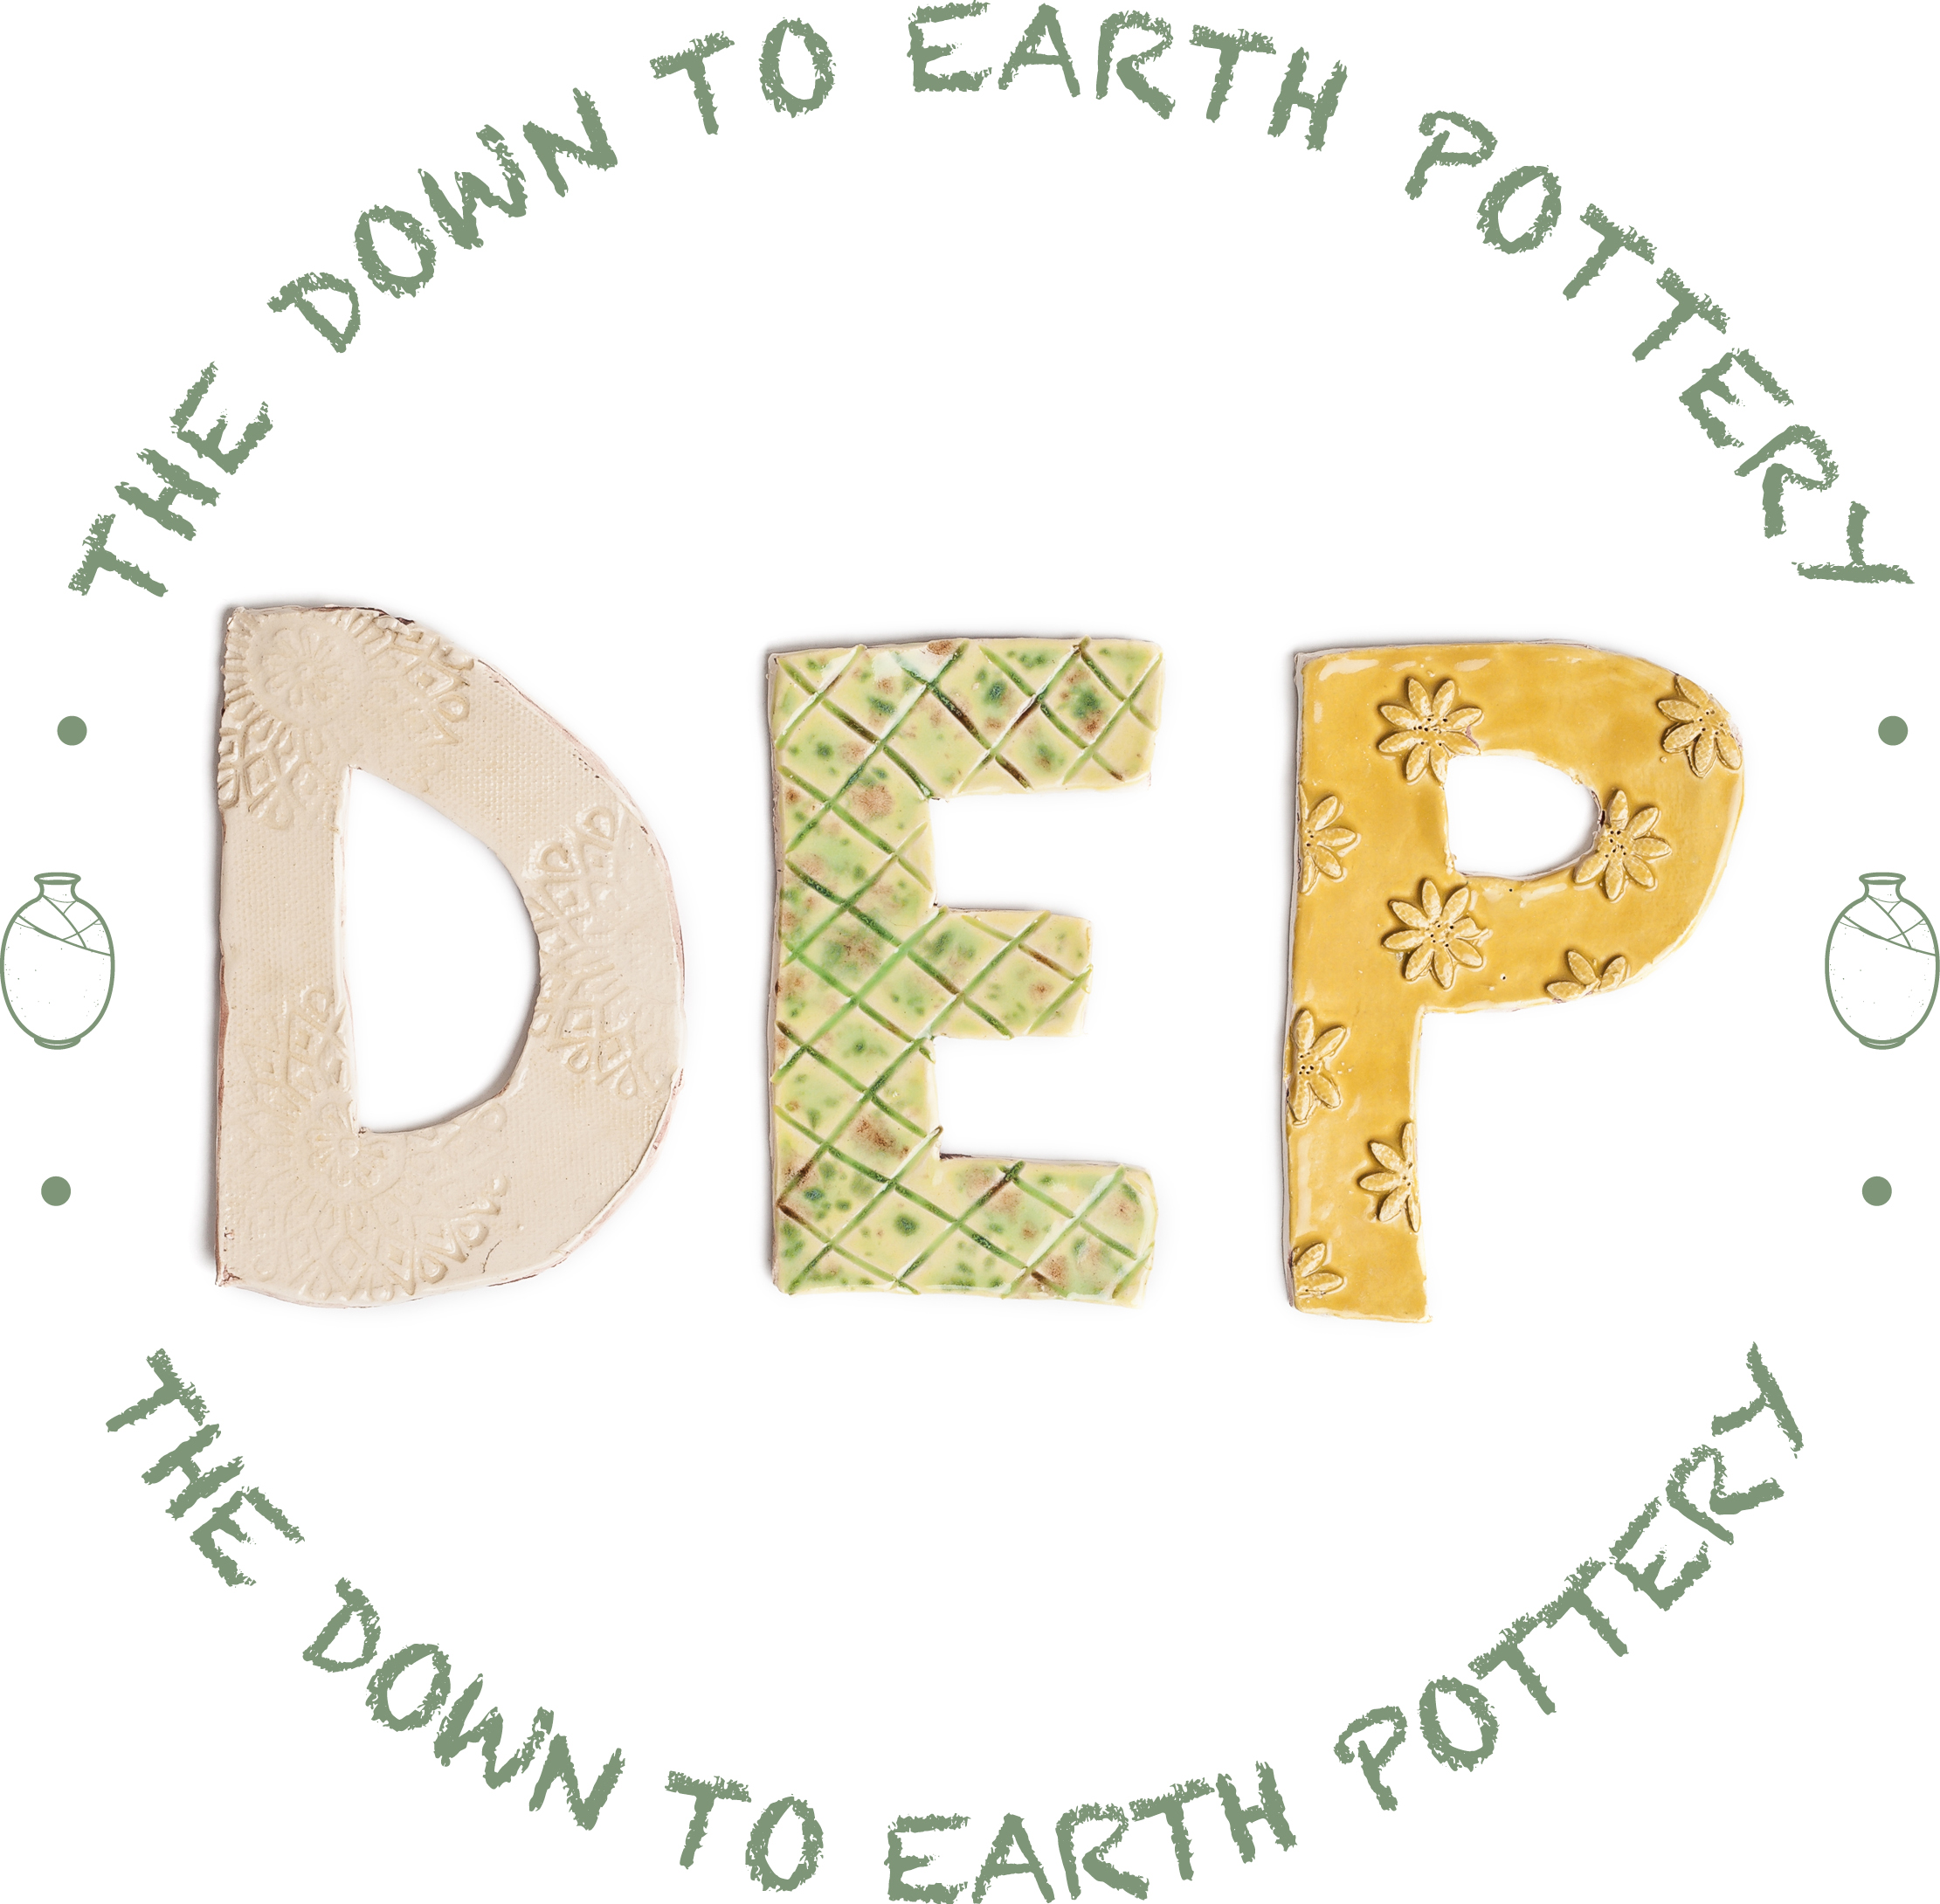 Down To Earth Pottery